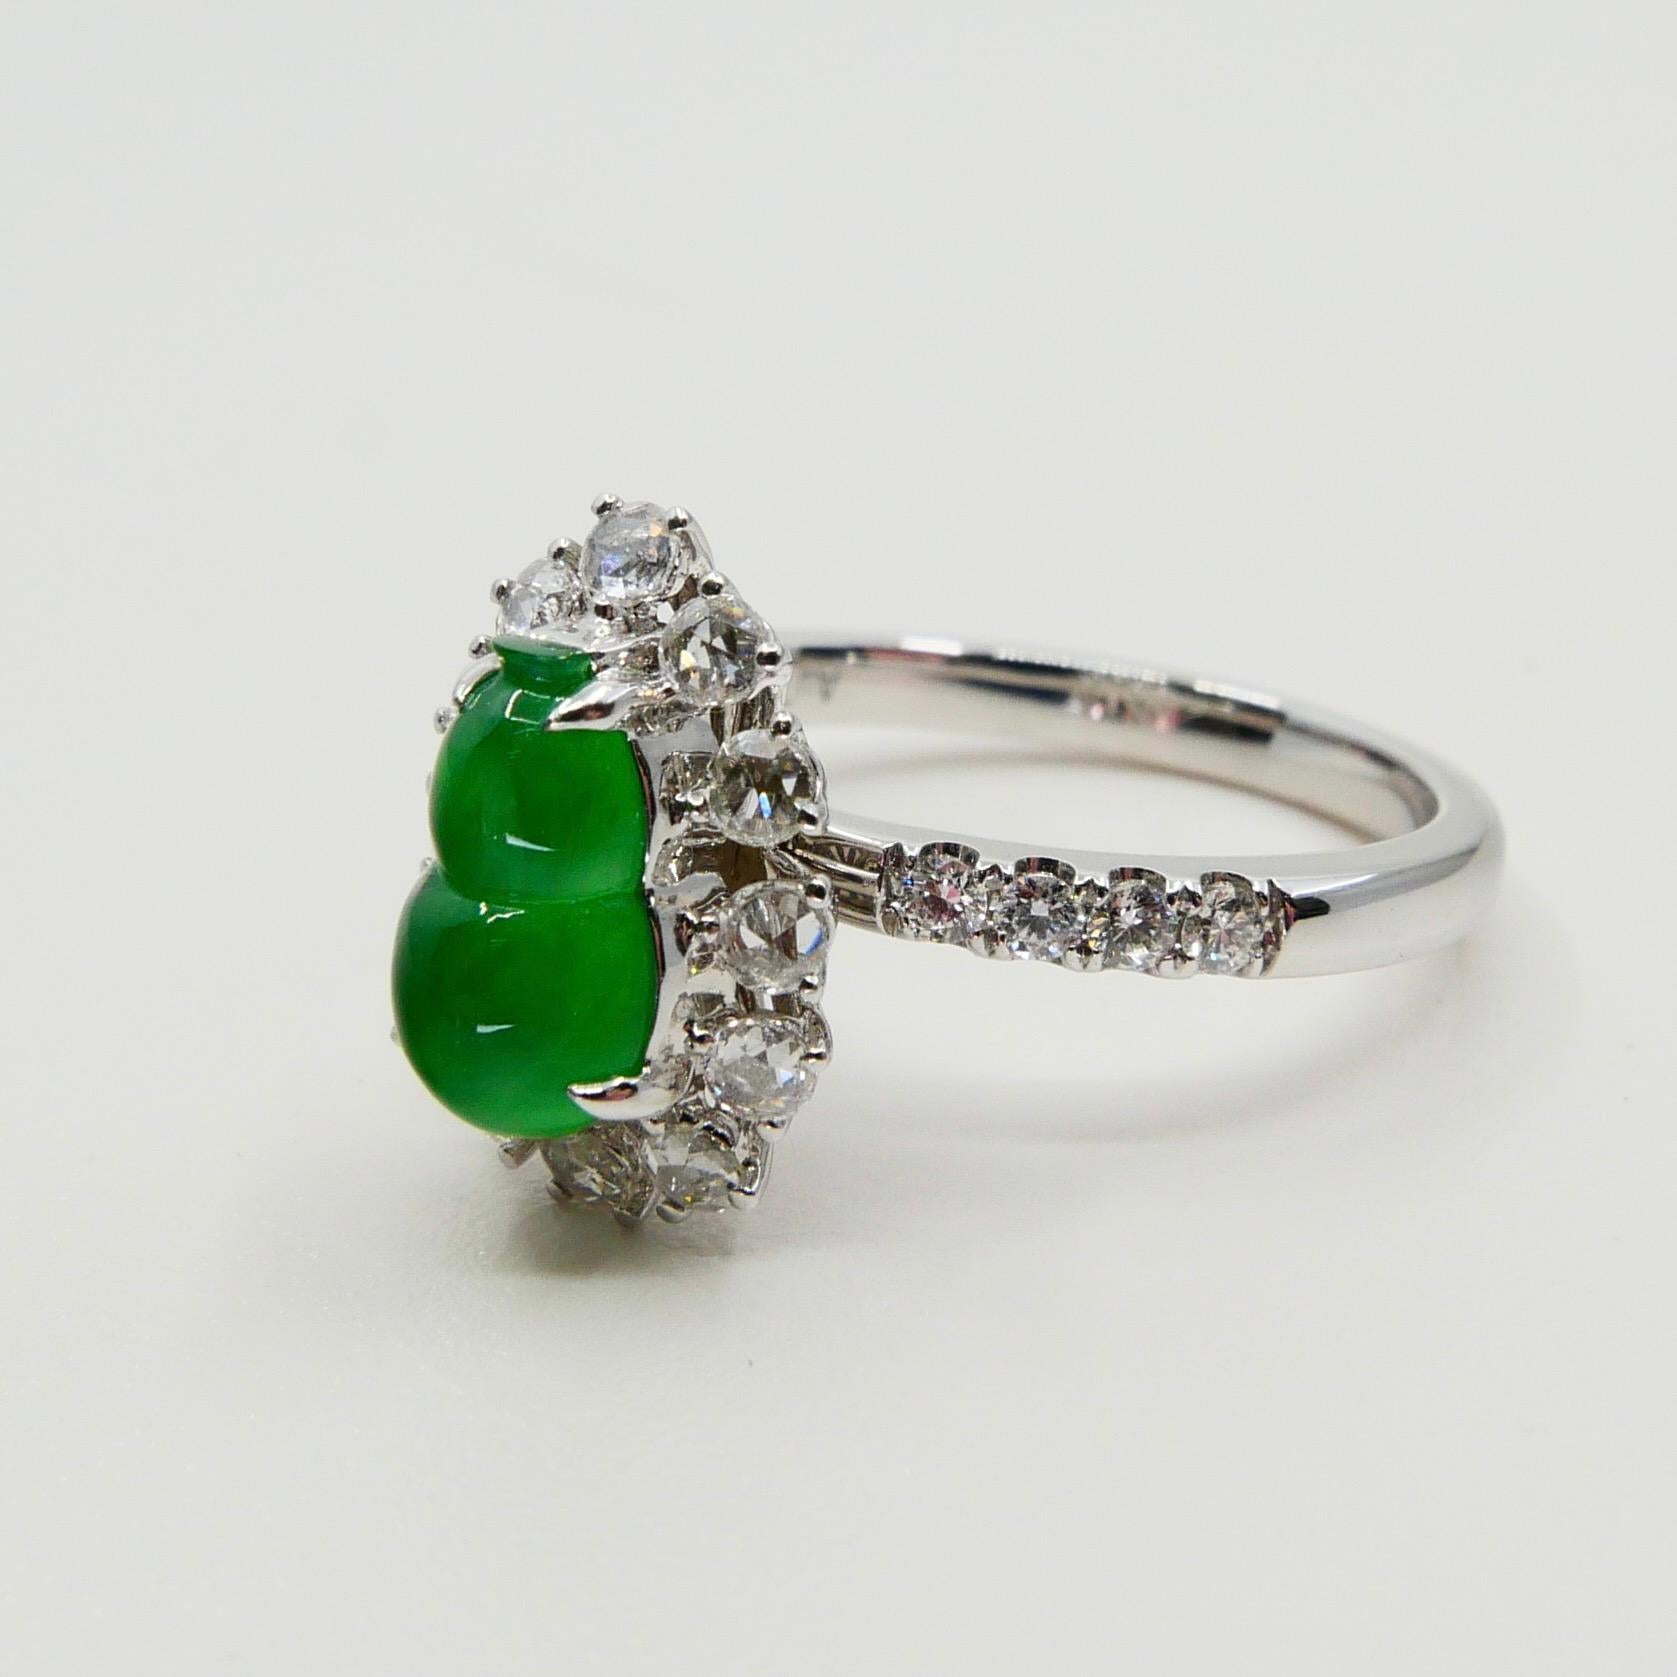 Certified Natural Imperial Jade Gourd & Diamond Cocktail Ring, Super Glow 4